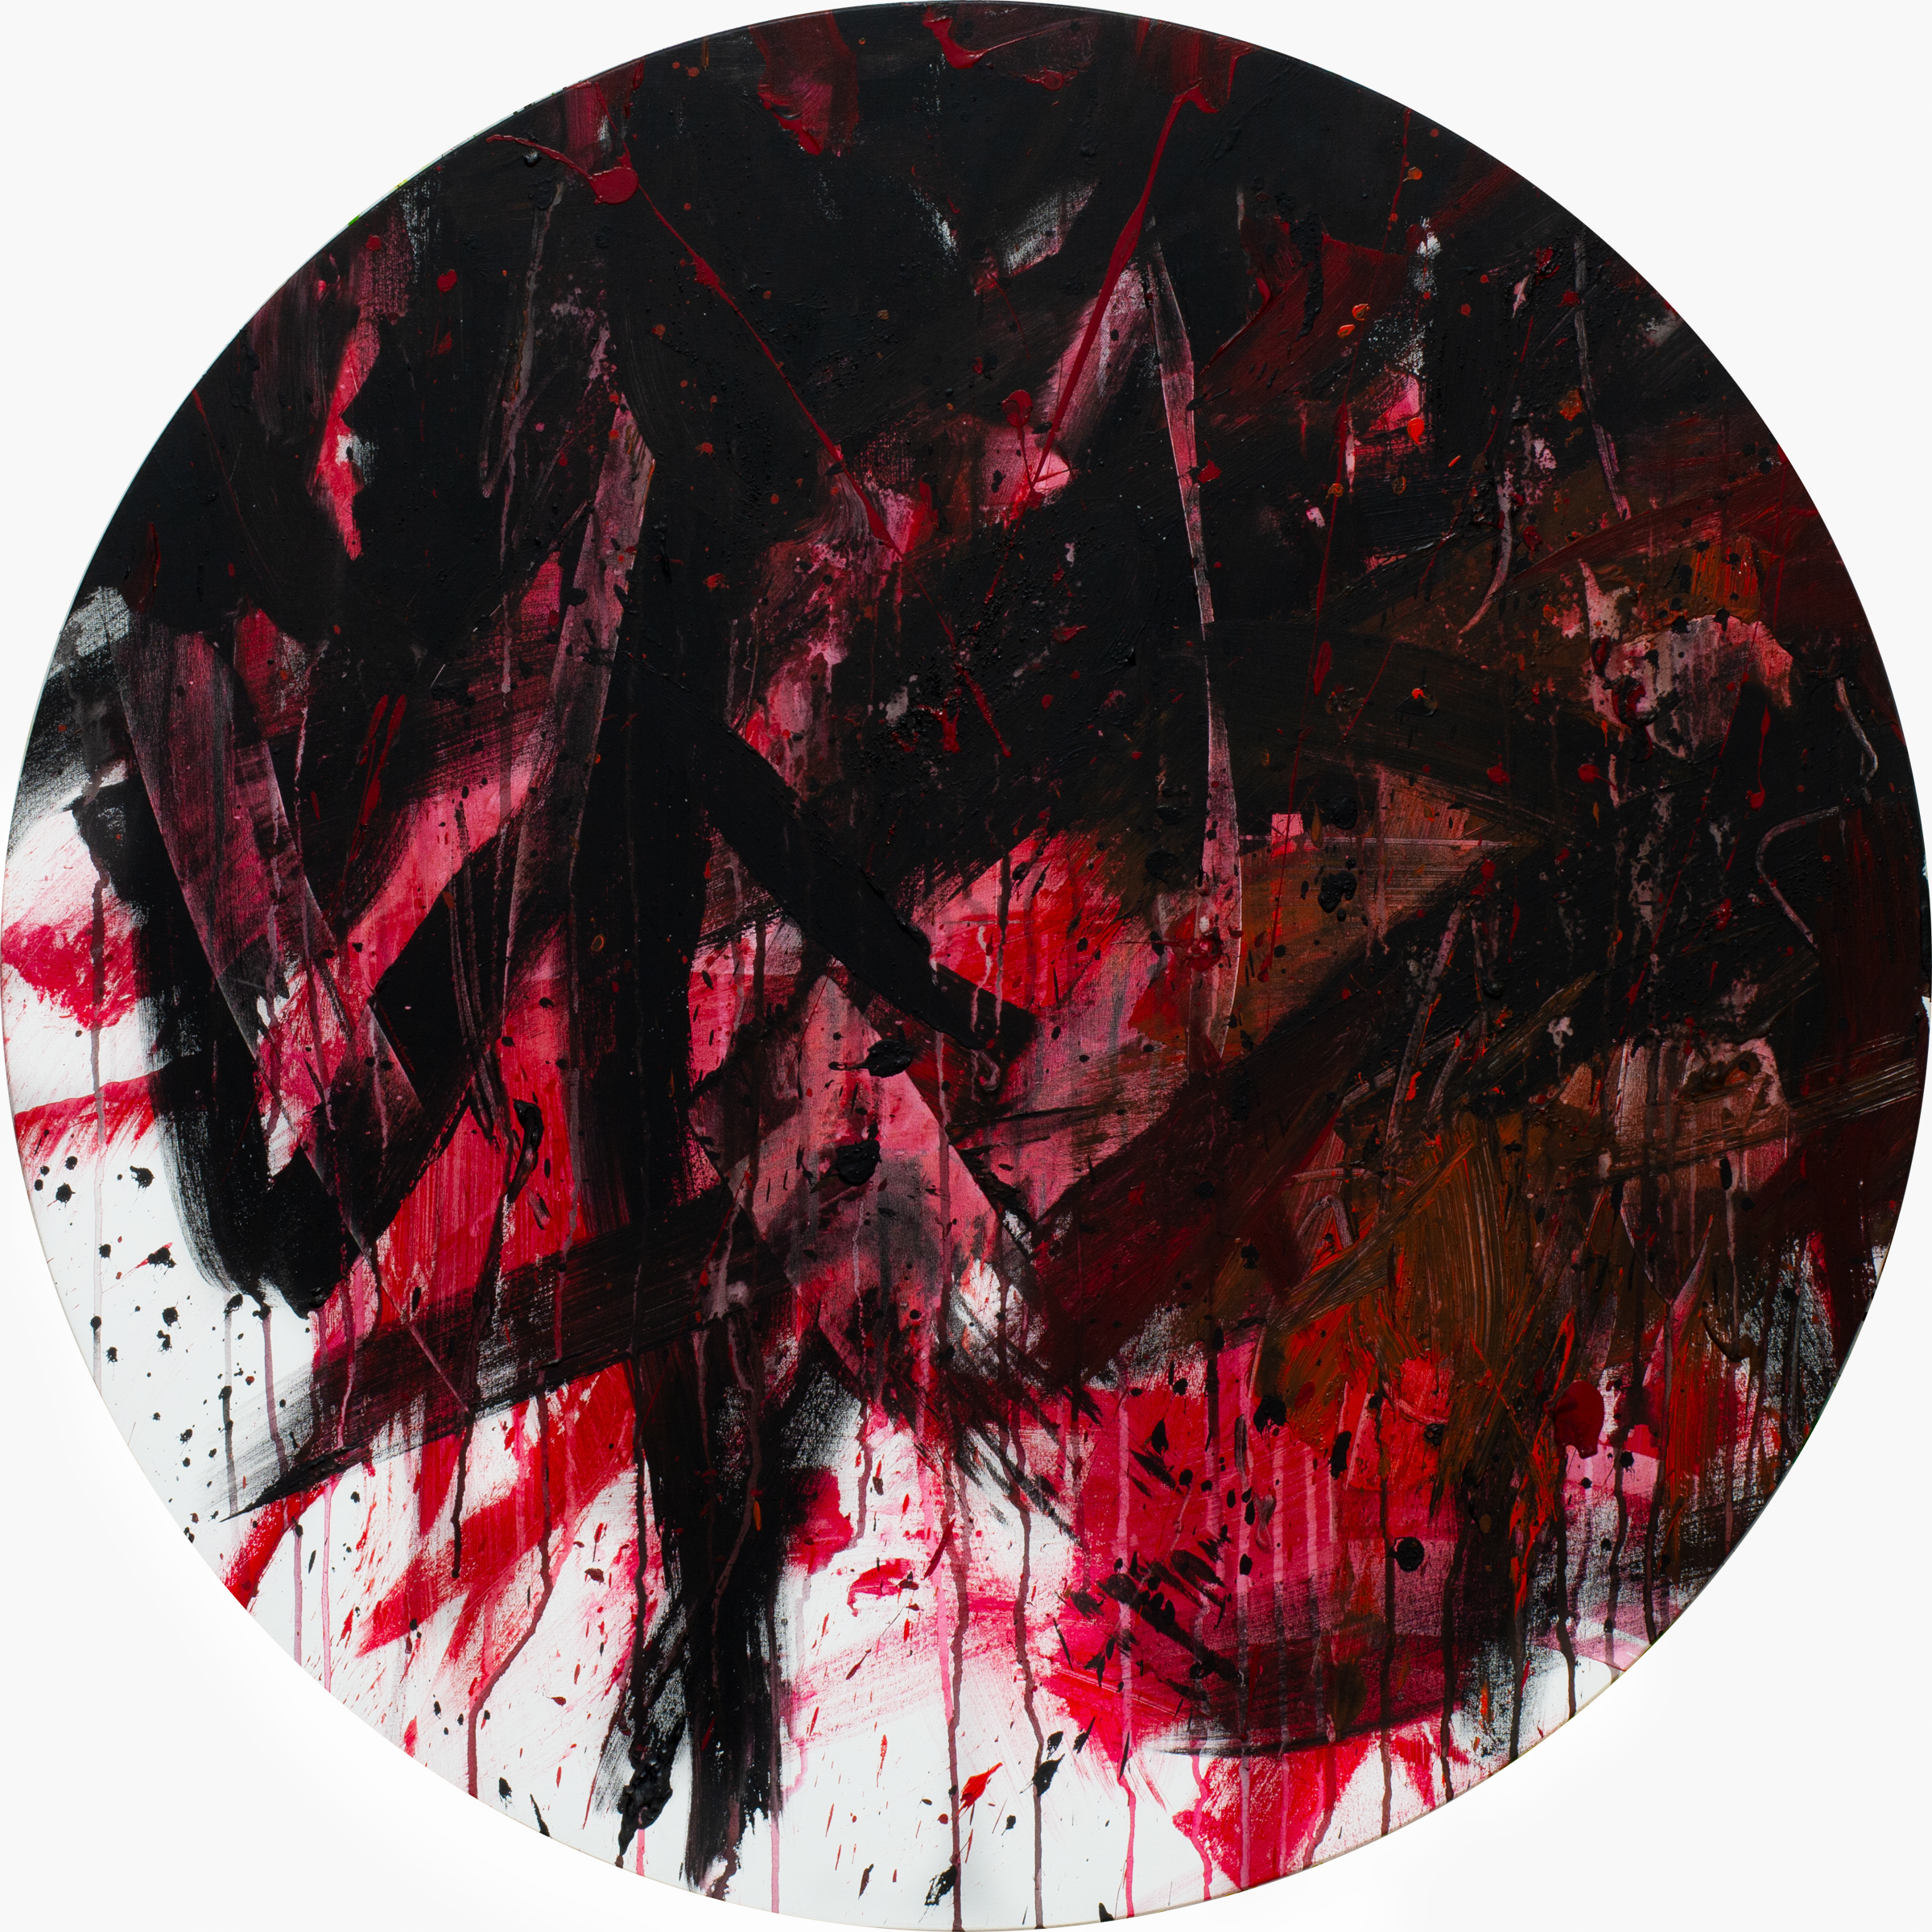 Black and red n. 1, 2023 | Acrylic on canvas, diameter 90 cm